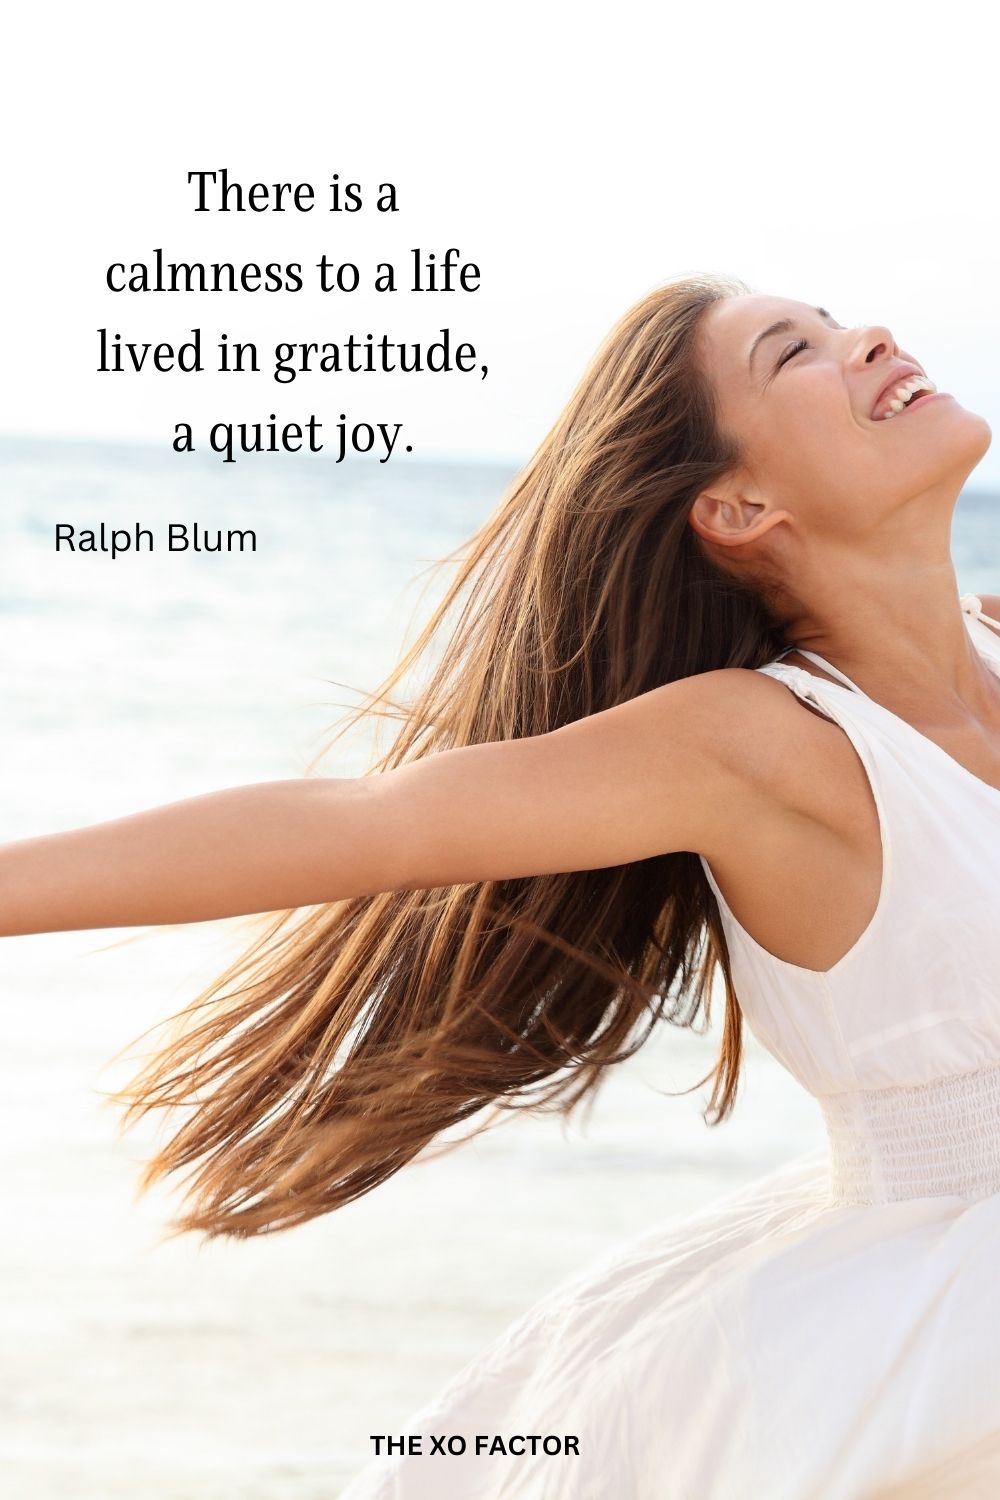 There is a calmness to a life lived in gratitude, a quiet joy.
